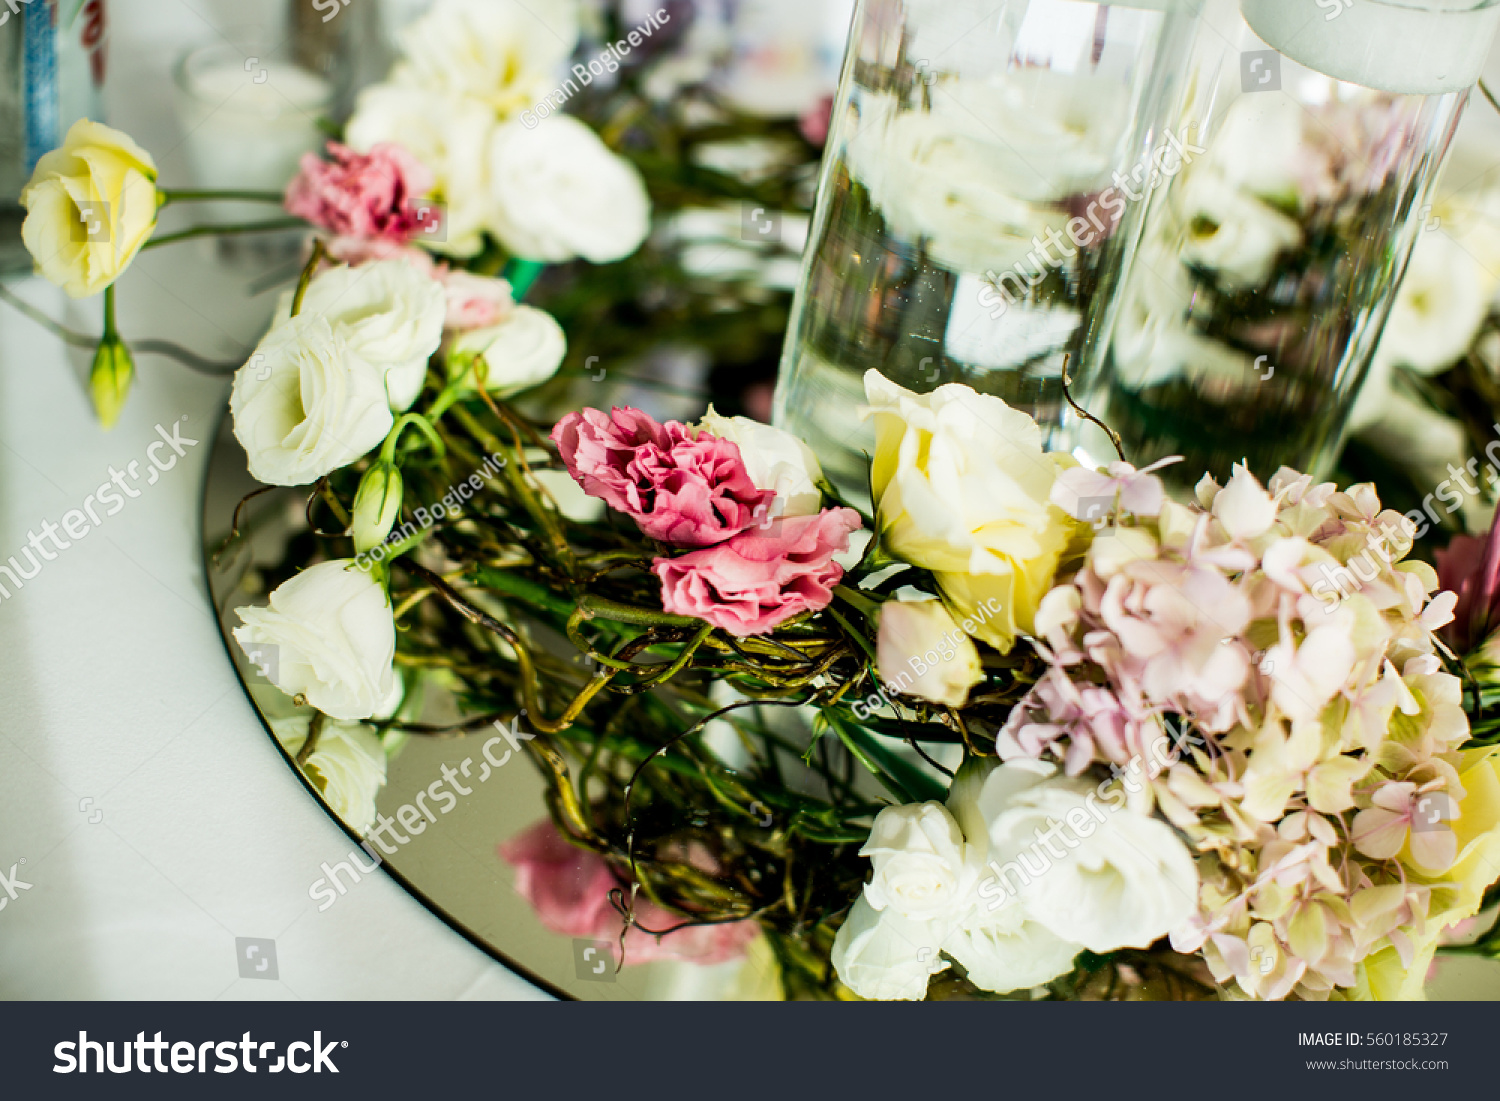 Detail of flower wedding decoration on the table #560185327